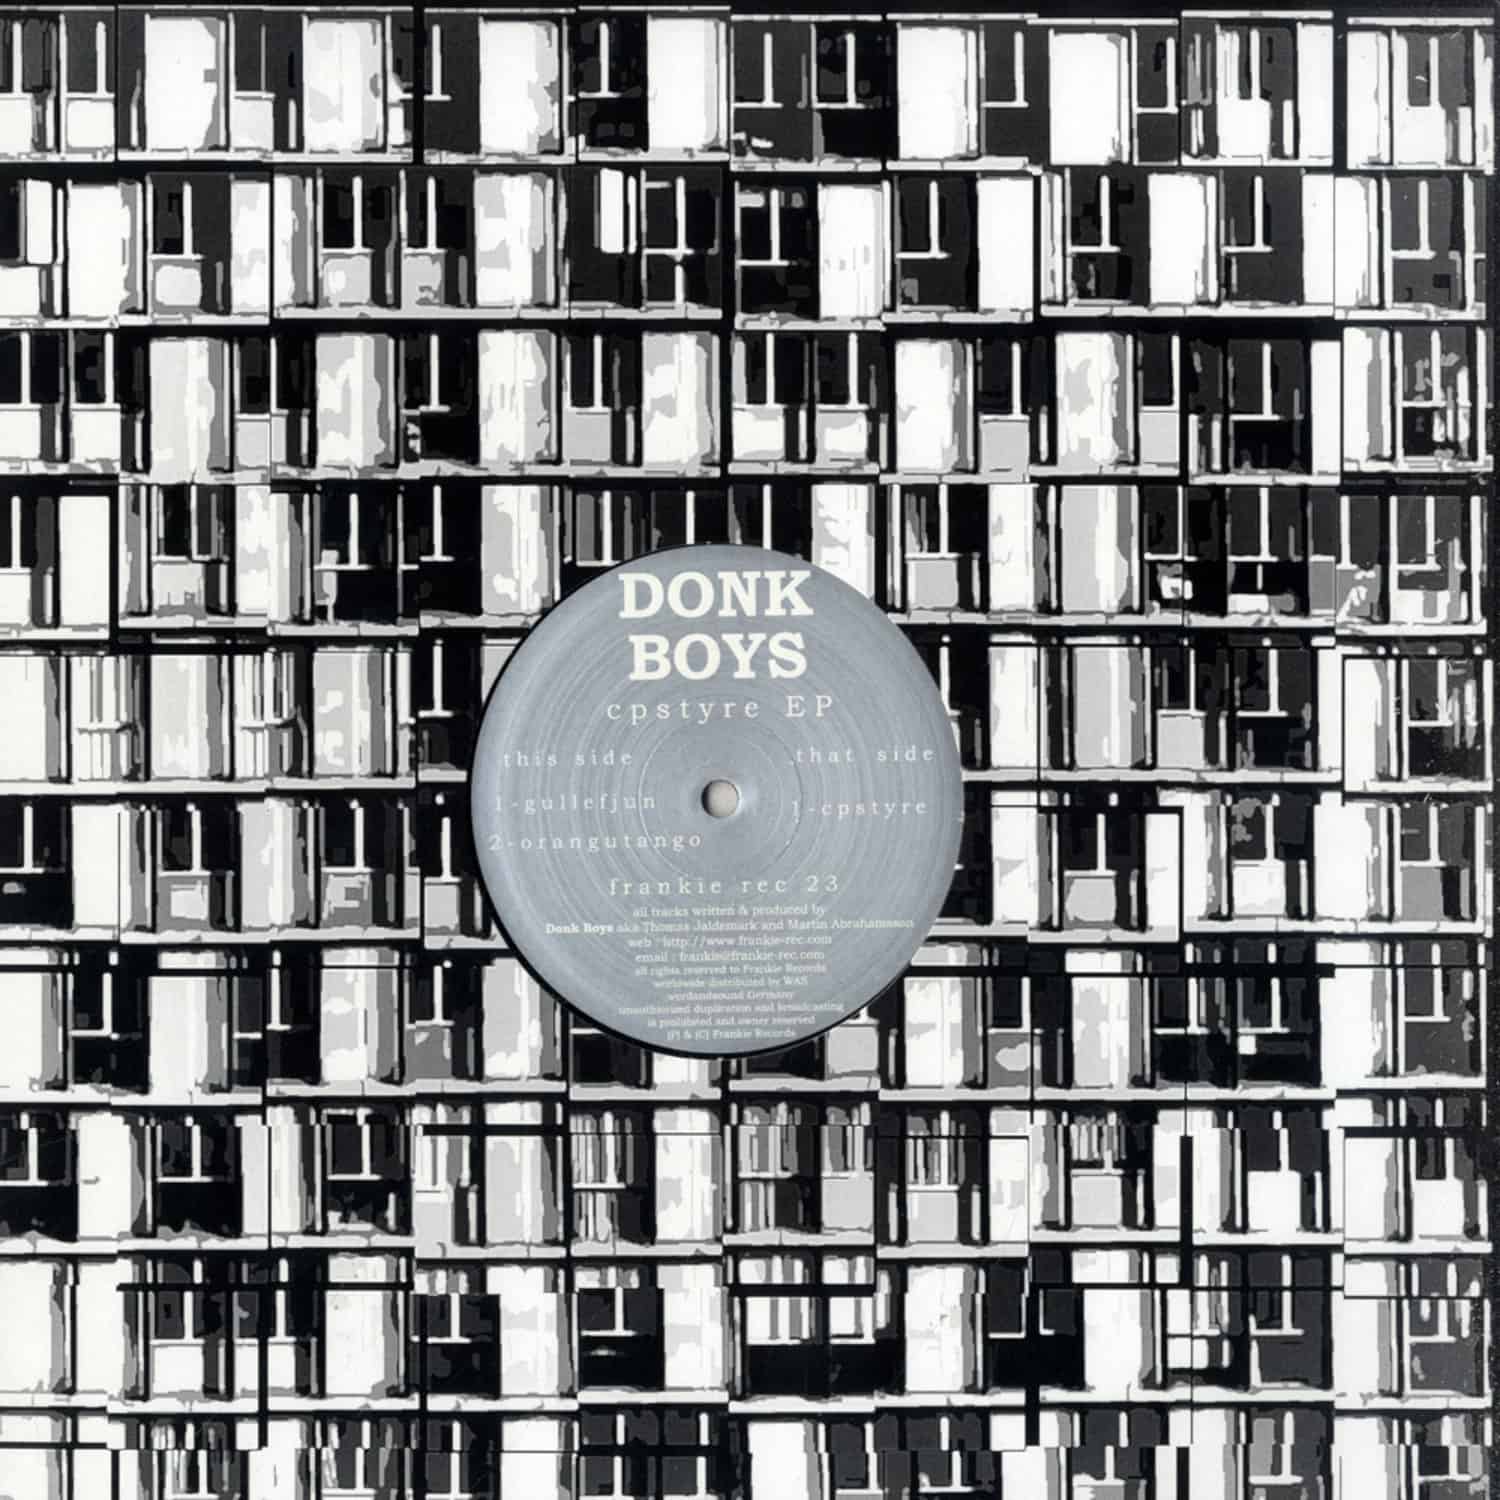 Donk Boys - CP STYRE EP